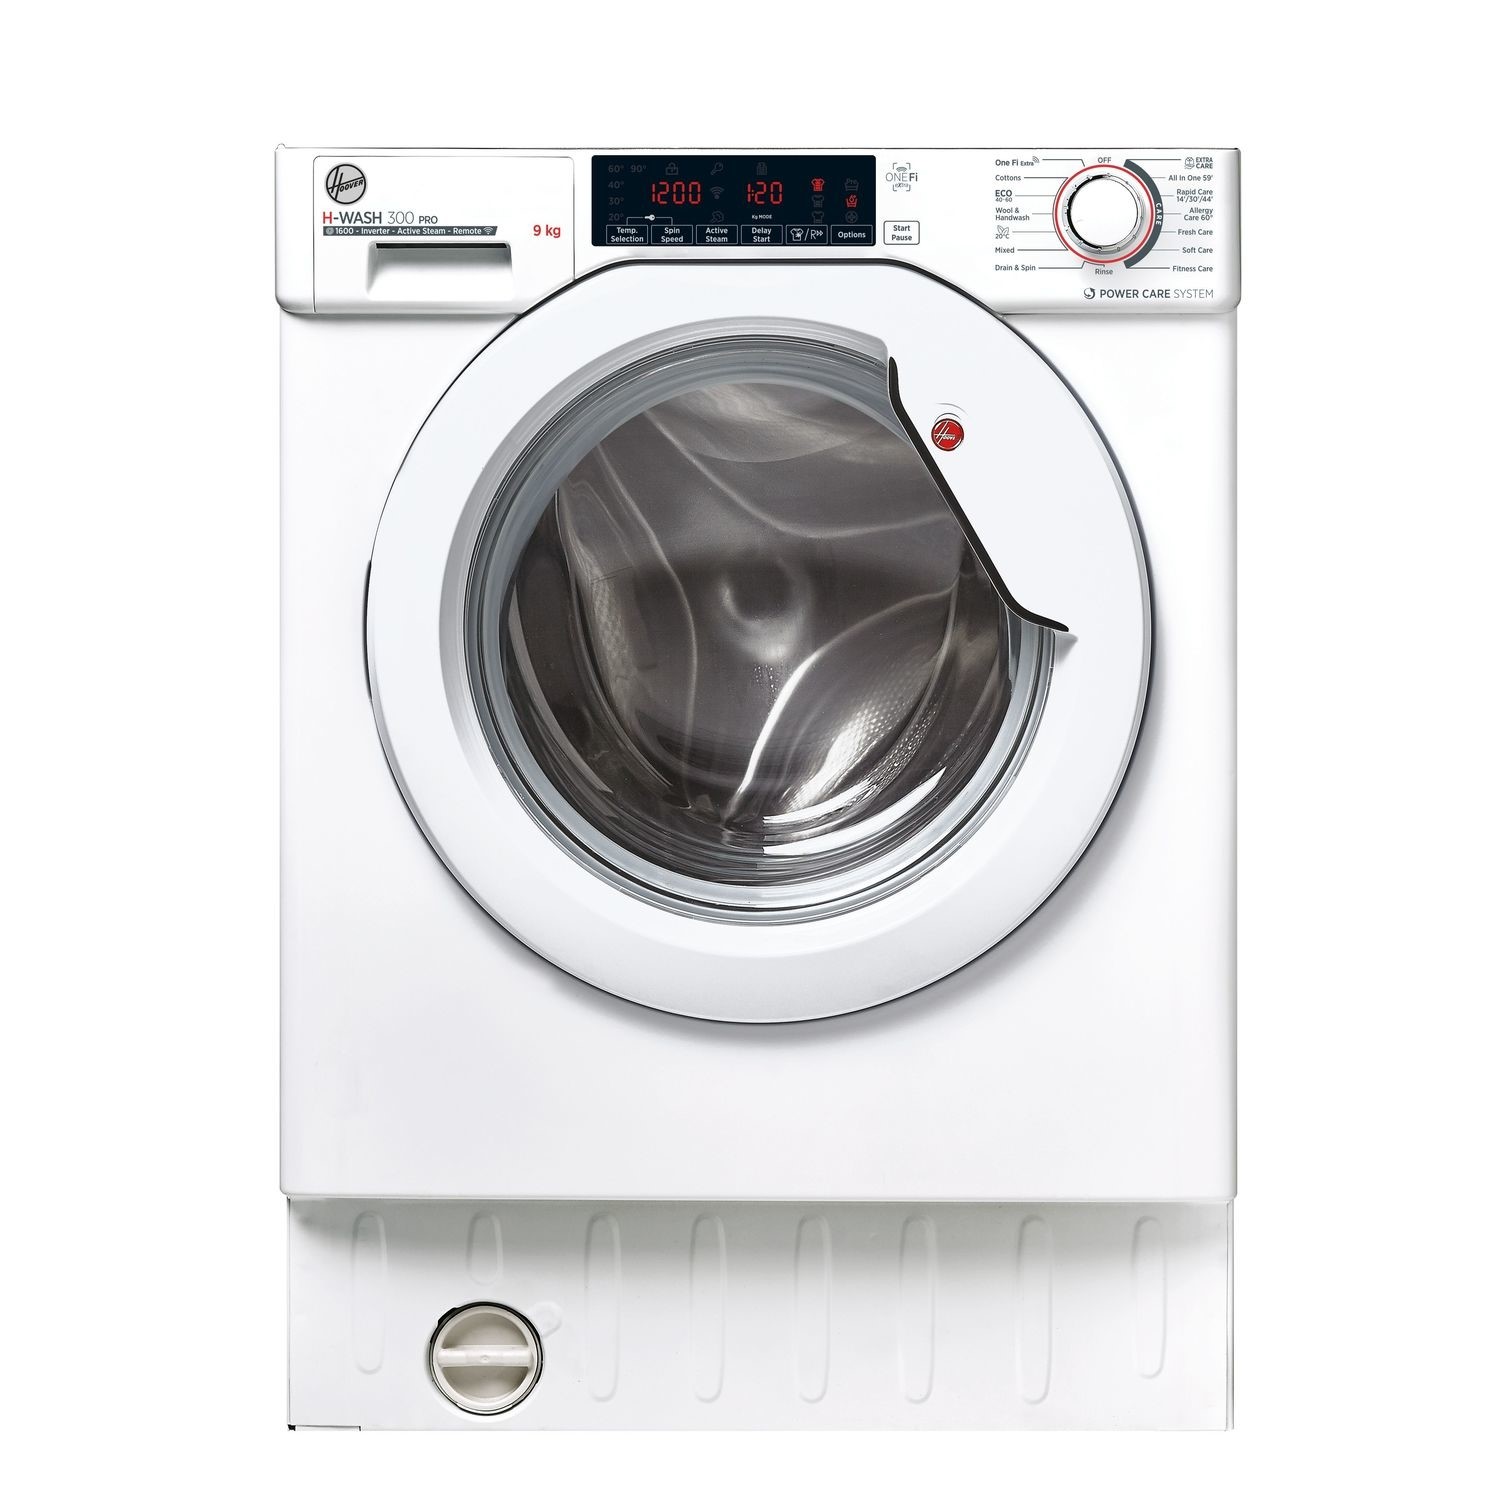 Photos - Other for Computer Hoover H-Wash 300 Pro 9kg 1600rpm Integrated Washing Machine - White 31801 